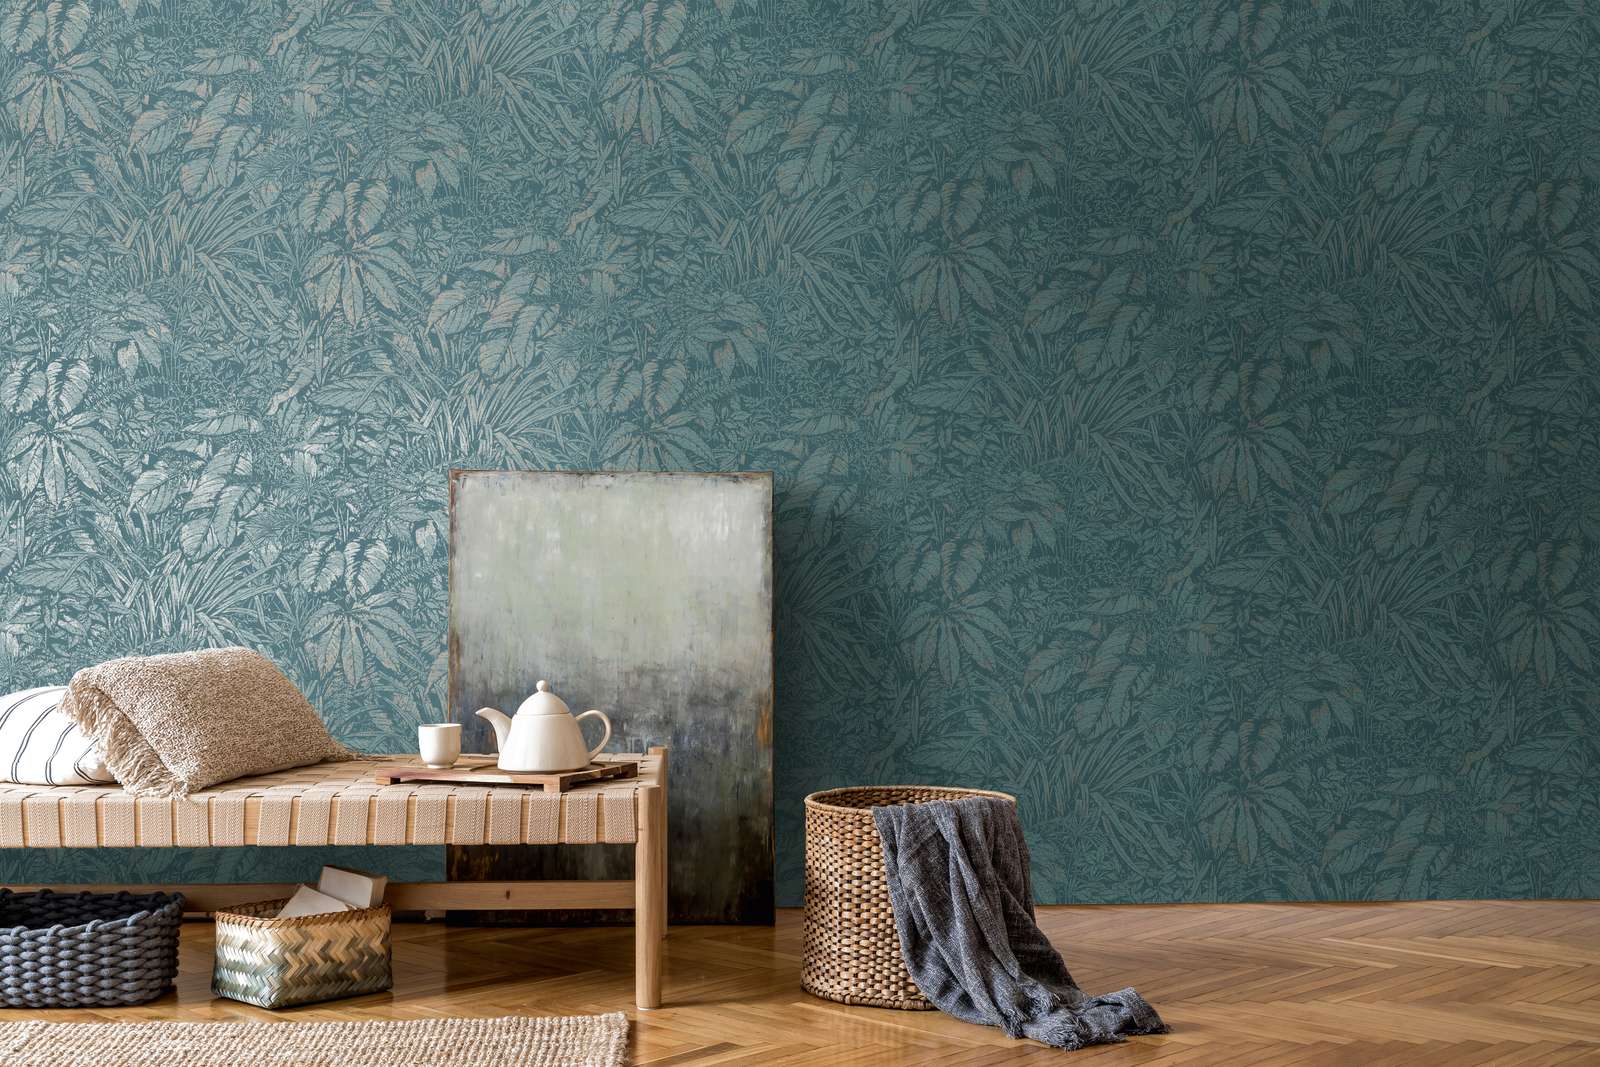             Floral non-woven wallpaper with palm leaf pattern - blue, petrol, silver
        